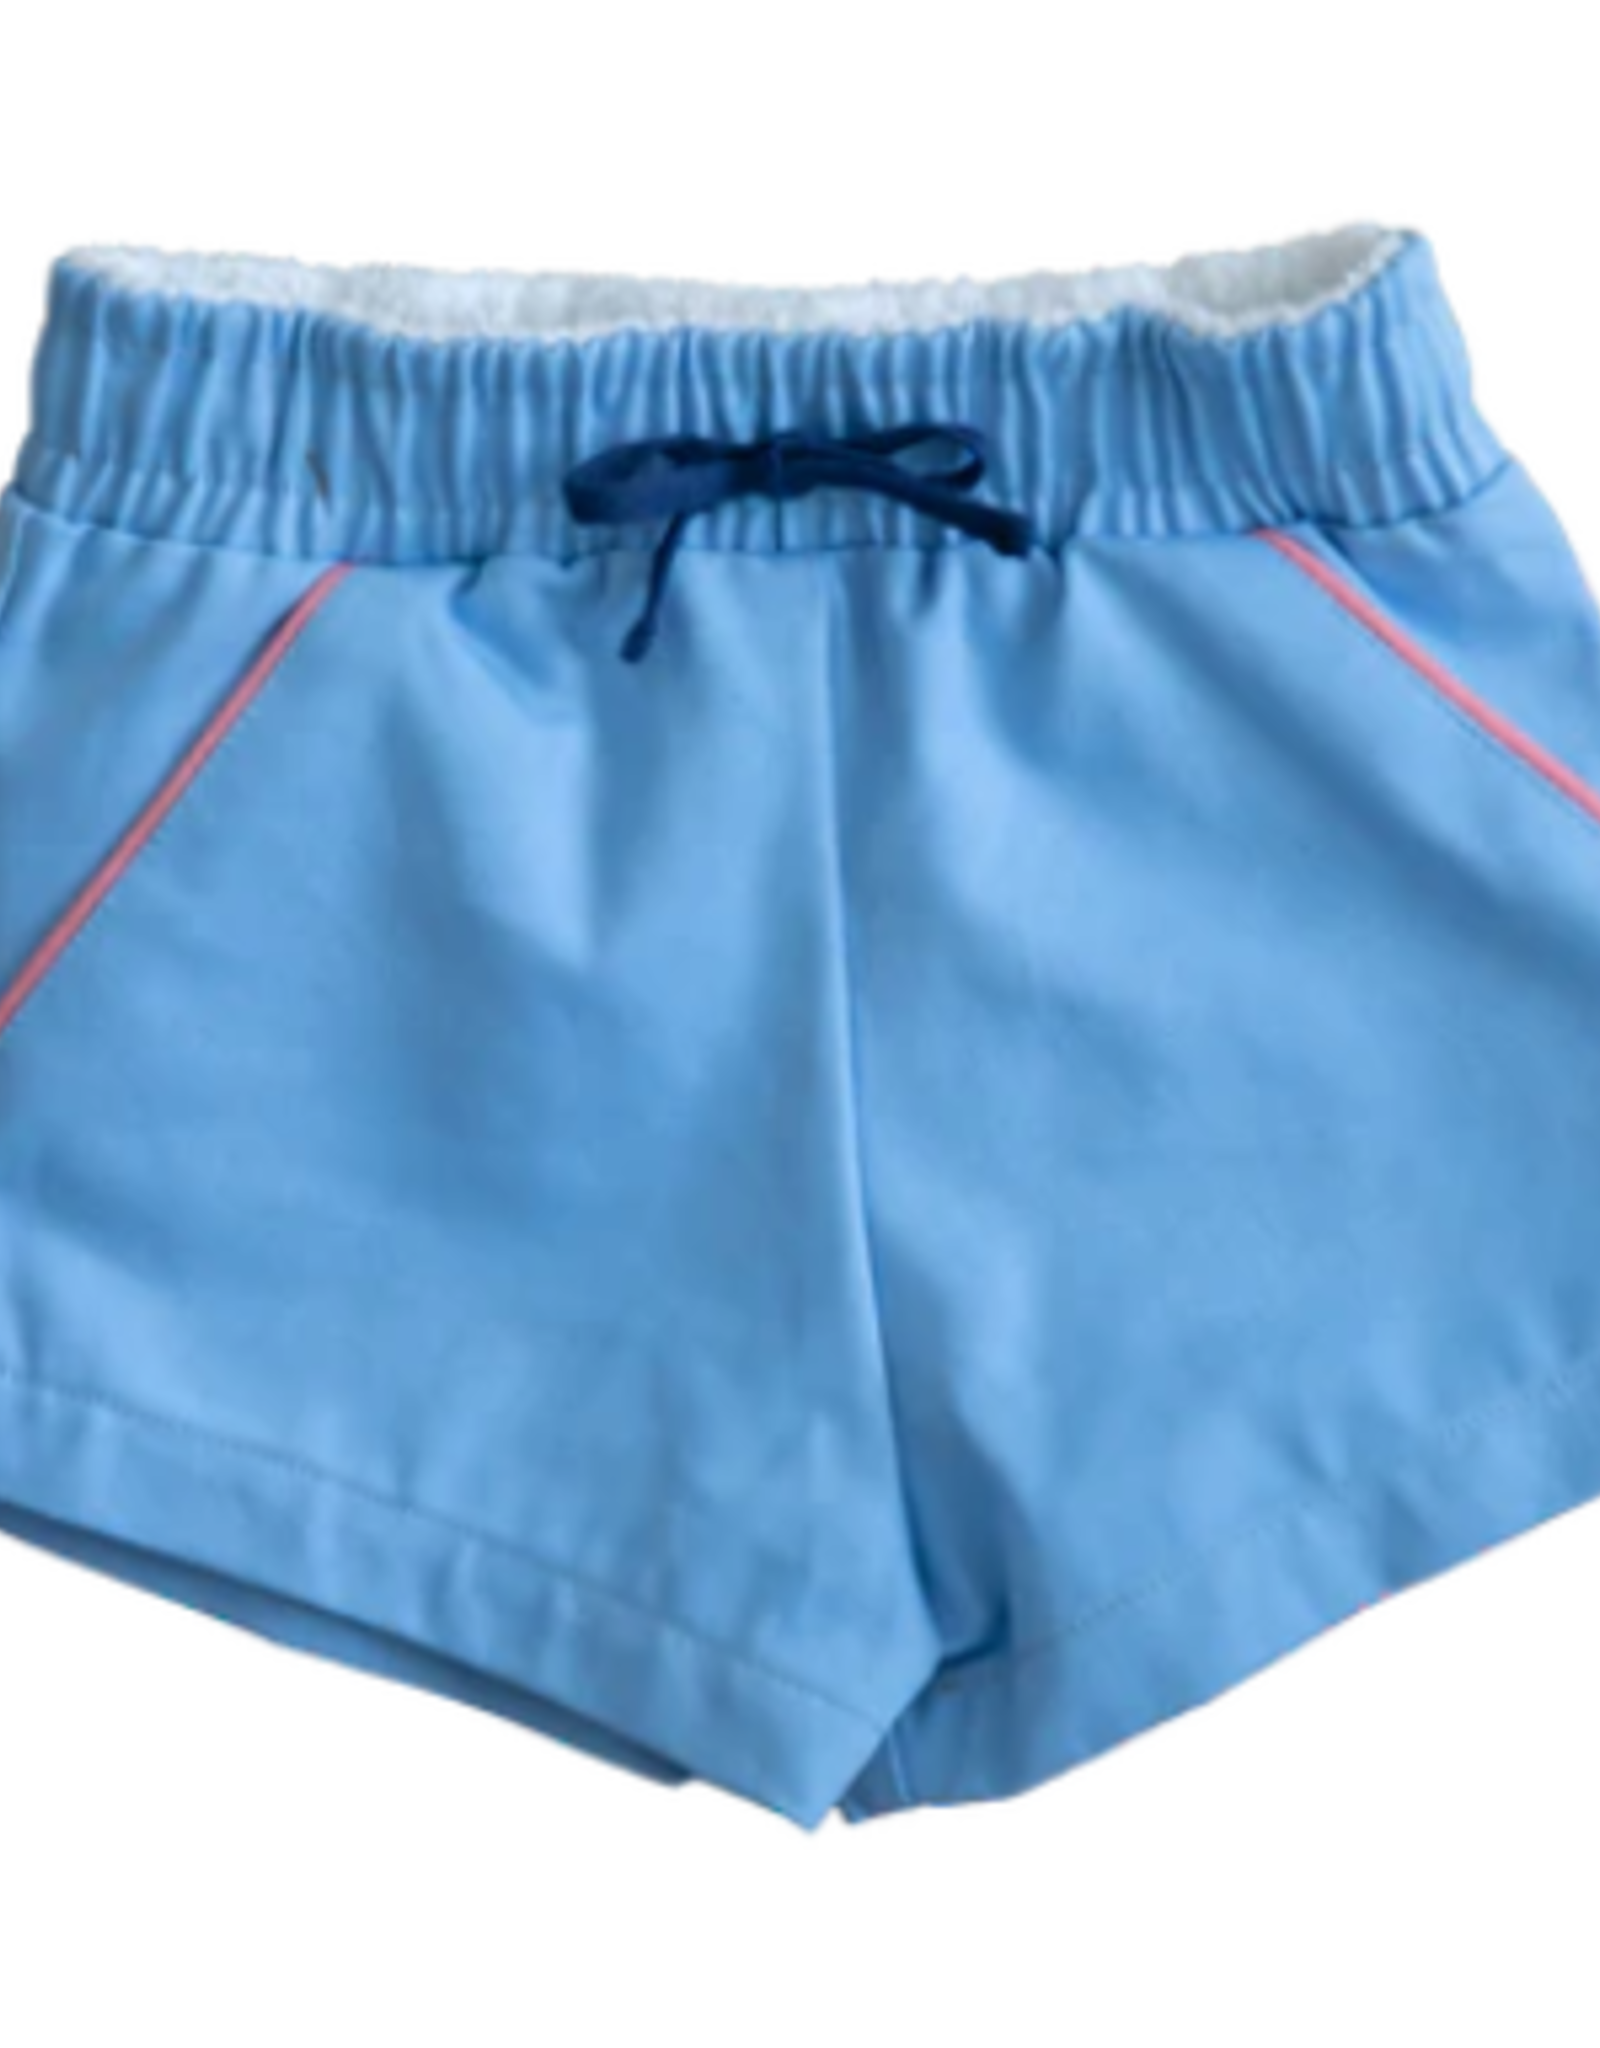 Cadets, LLC Chad Cadets Lt. Blue w/Brown Piping Shorts